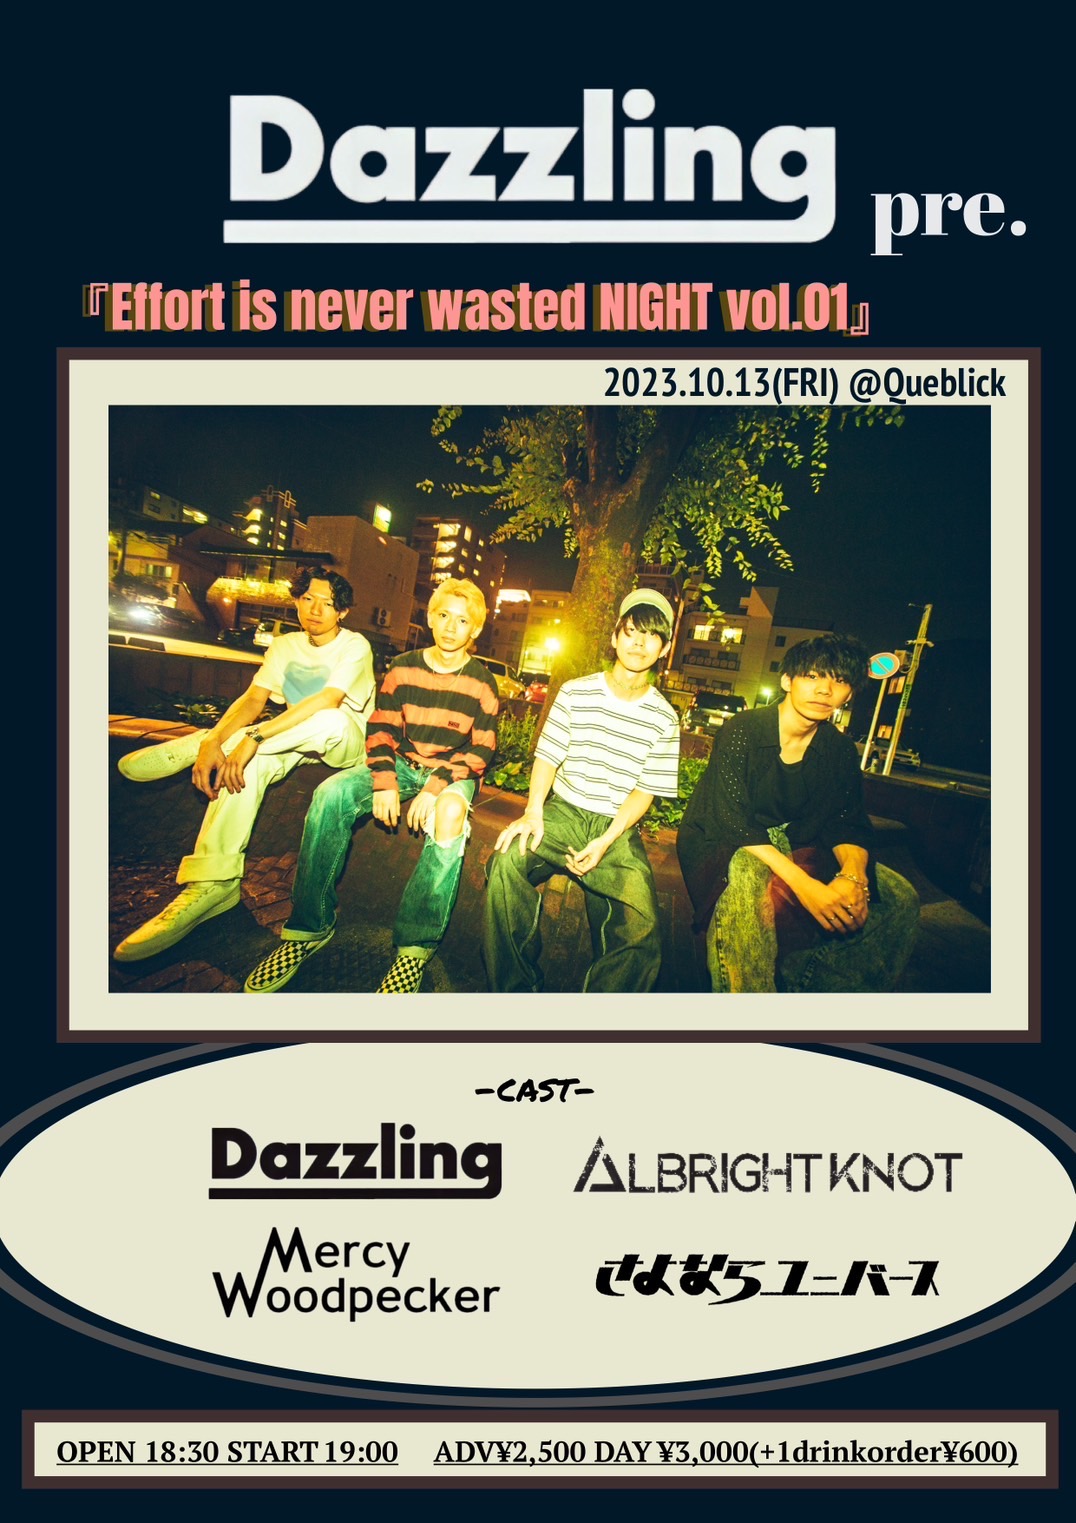 Effort is never wasted NIGHT vol.01